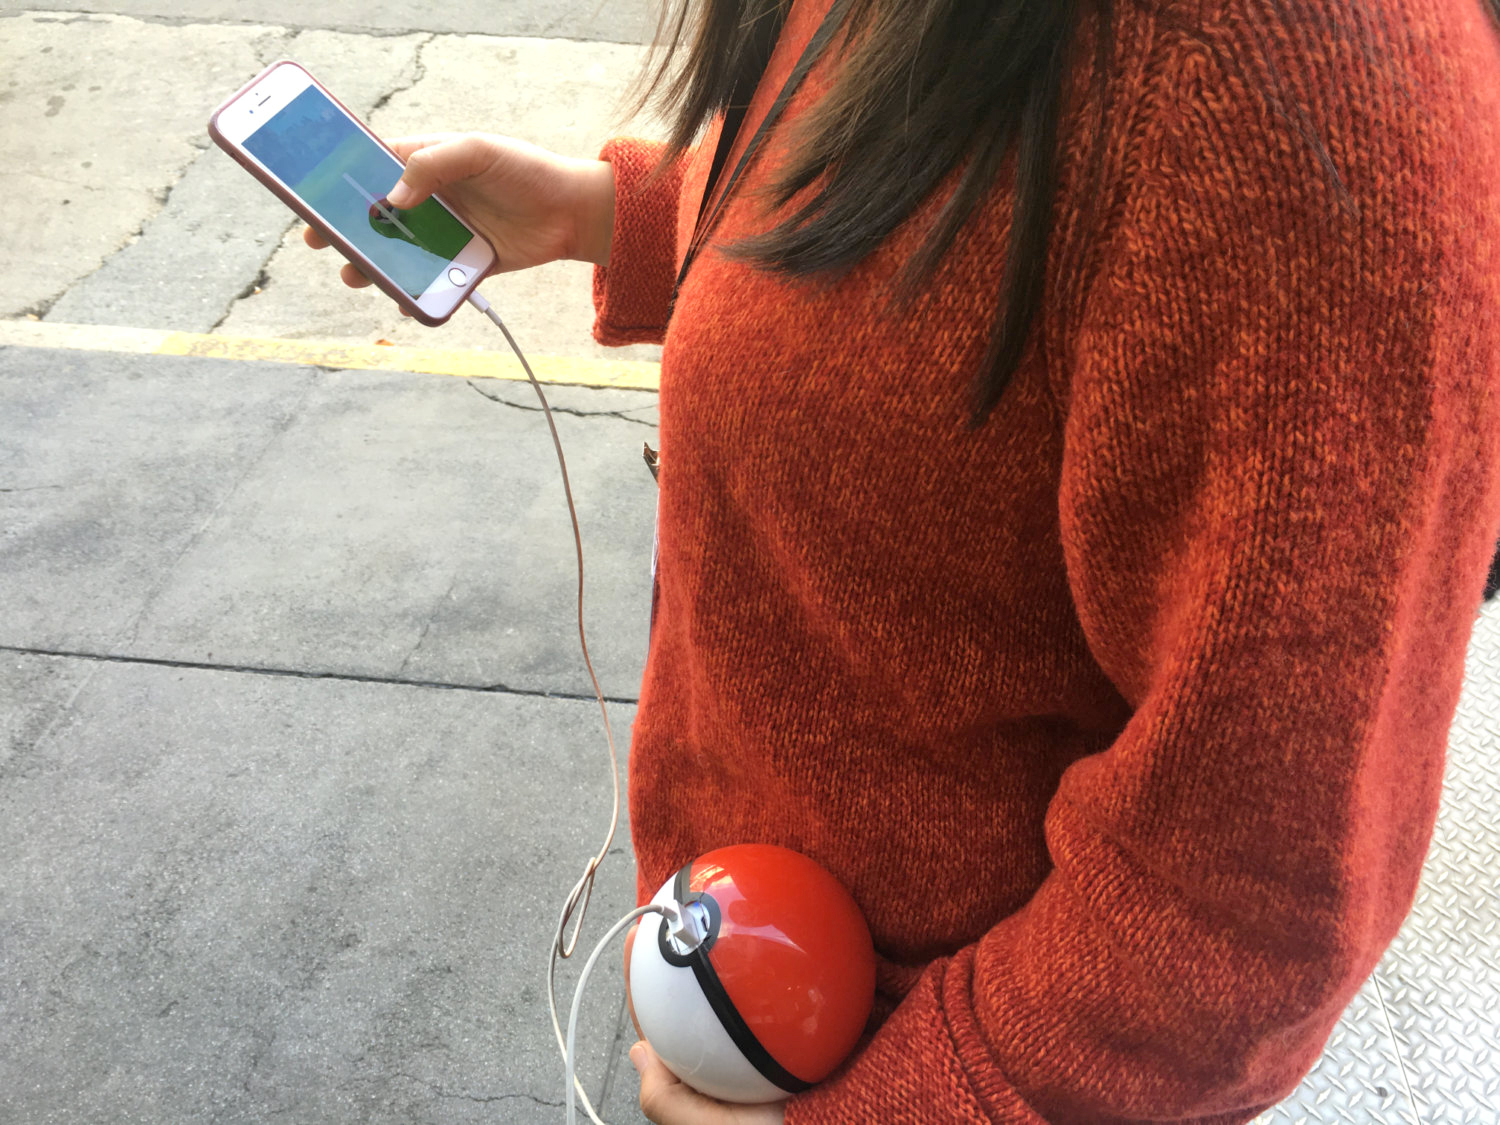 Pokeball USB Charger Ensures You Can Catch Them All Without Your Phone Dying